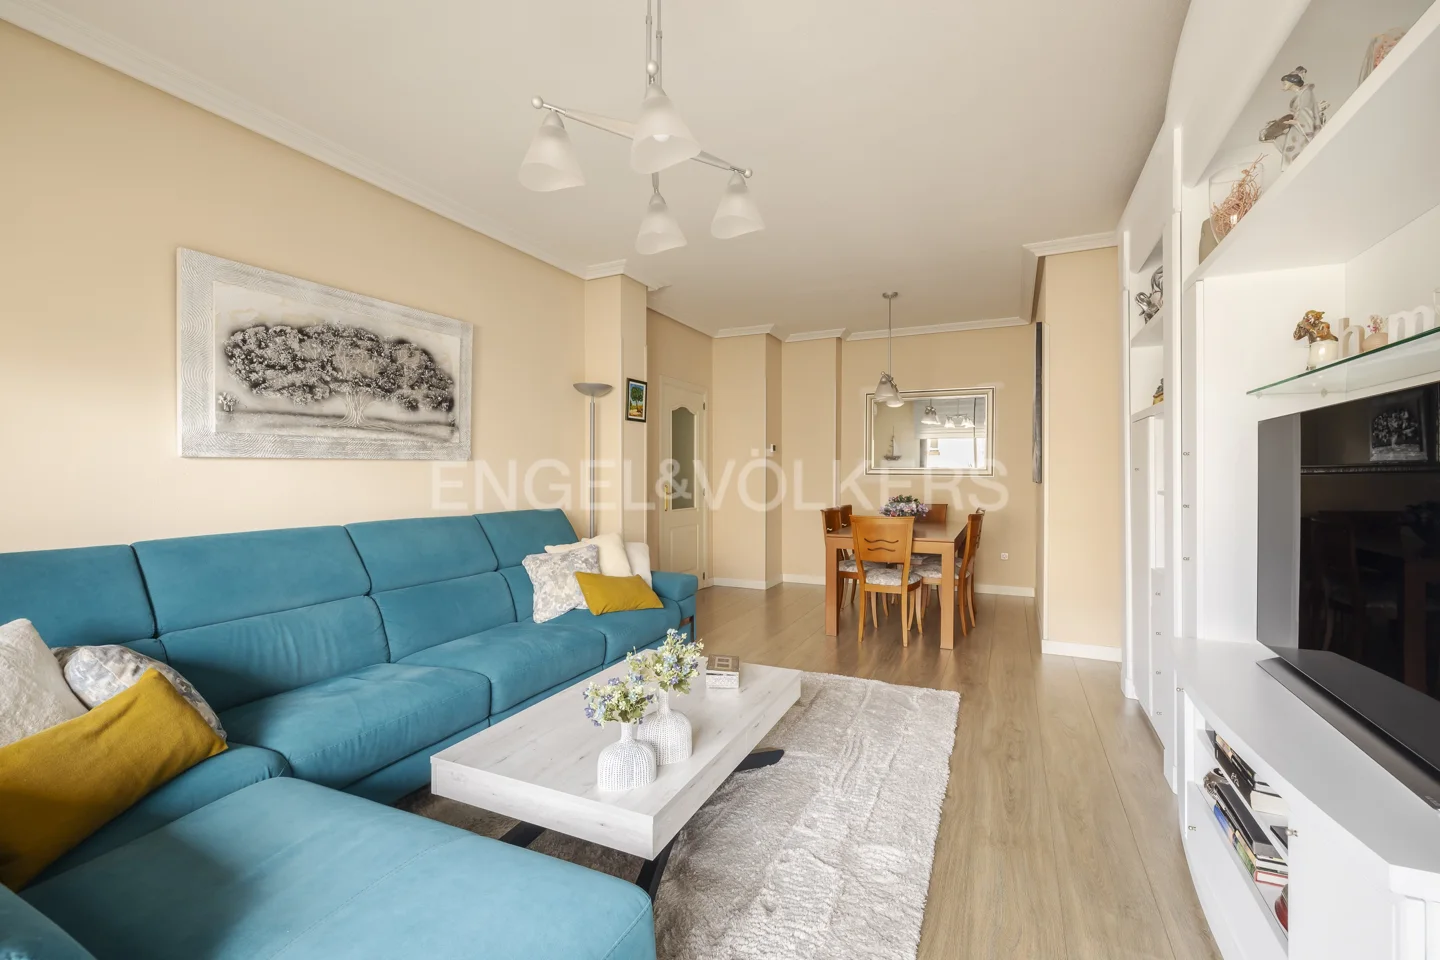 Spacious flat with terrace ideal for families